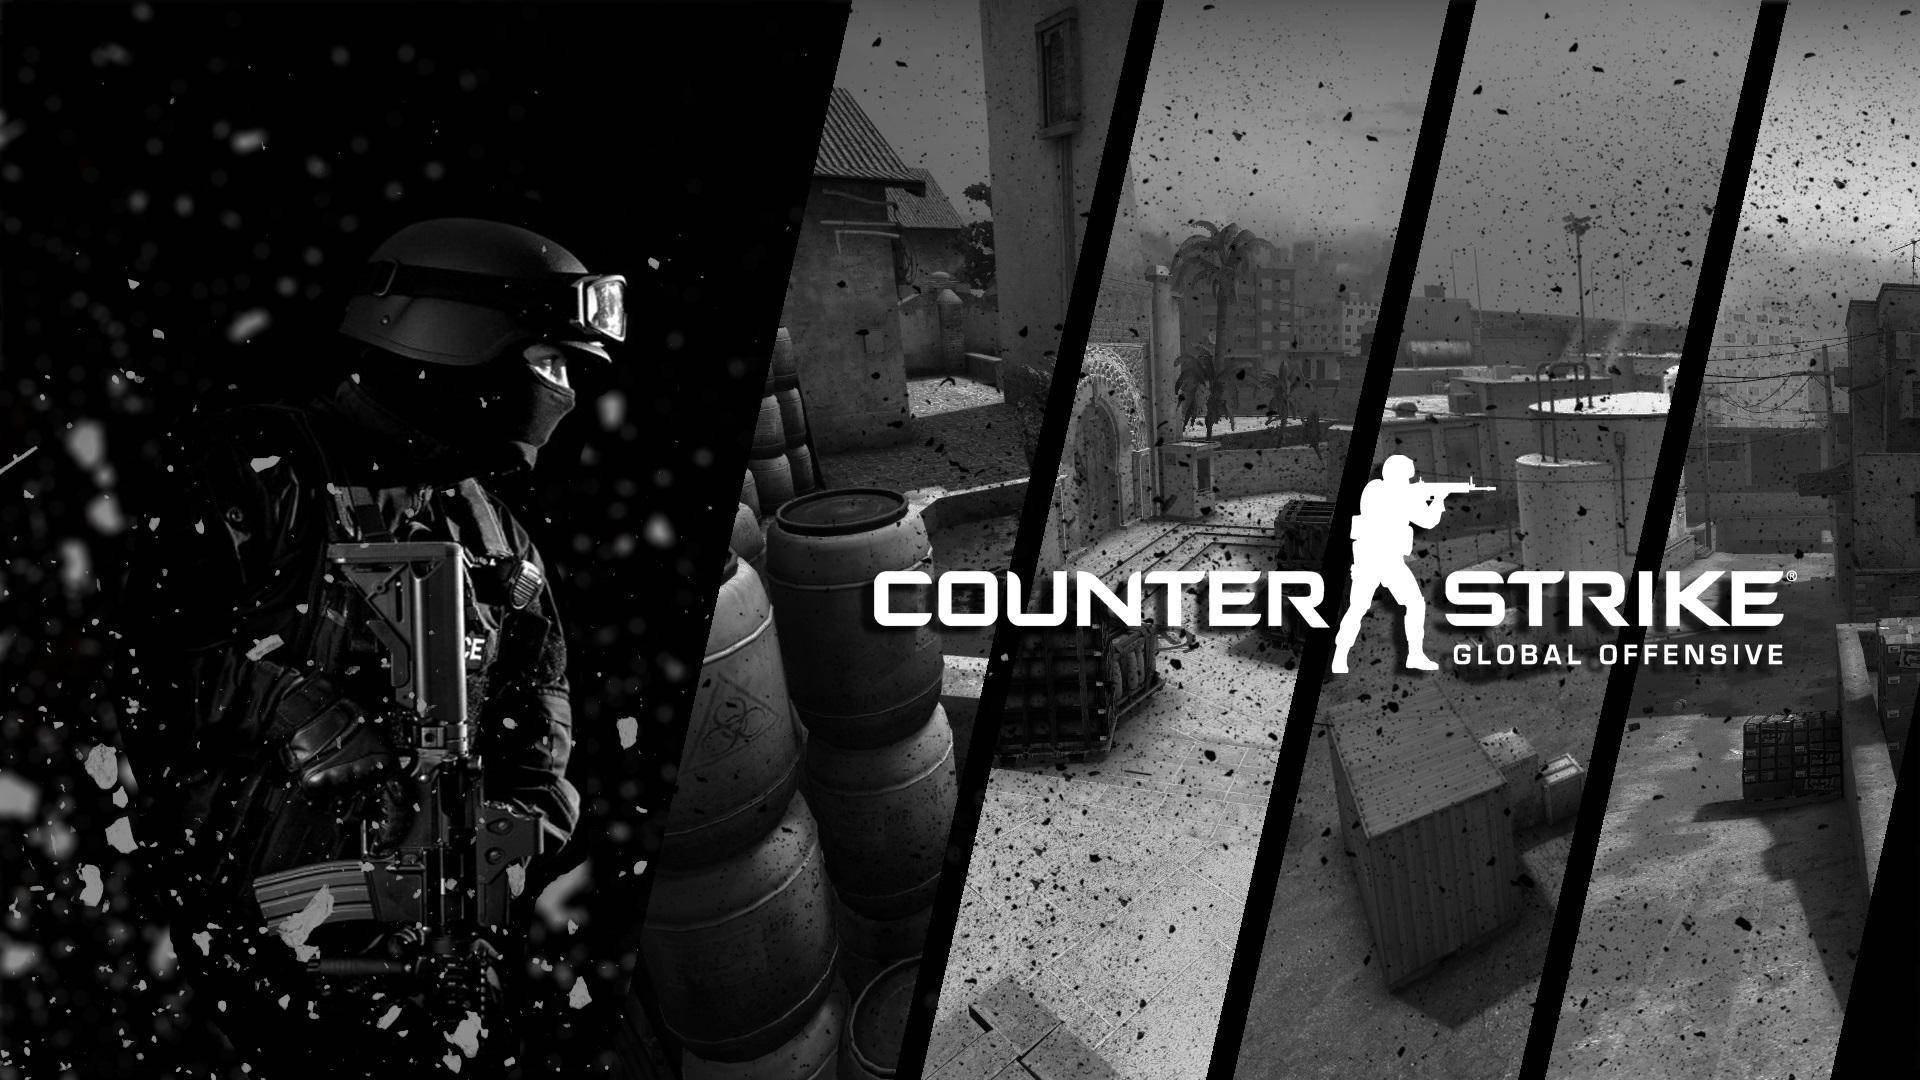 200+] Counter Strike Global Offensive Wallpapers | Wallpapers.Com